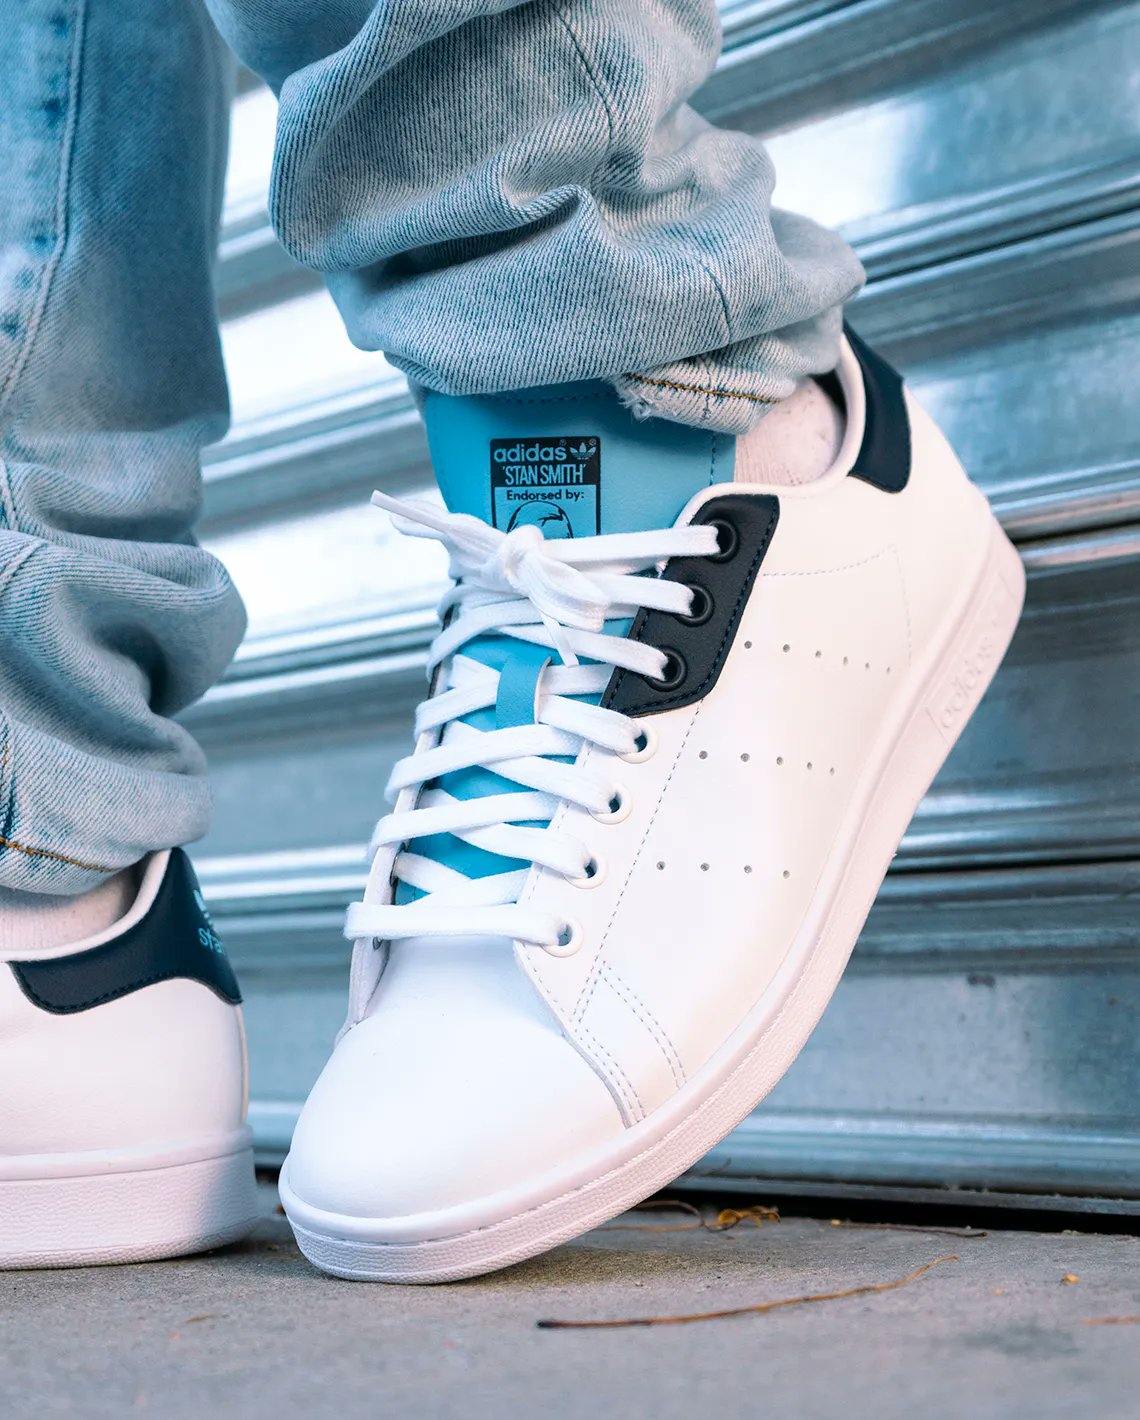 Sneaker News on Twitter: "Dare we call these the Stan Smith "UNC" 😂 adidas  is offering up to 50% off Stans and much more for Black Friday! Shop now:  https://t.co/7cfUitgGks #ad https://t.co/6dasOMa6r8" /